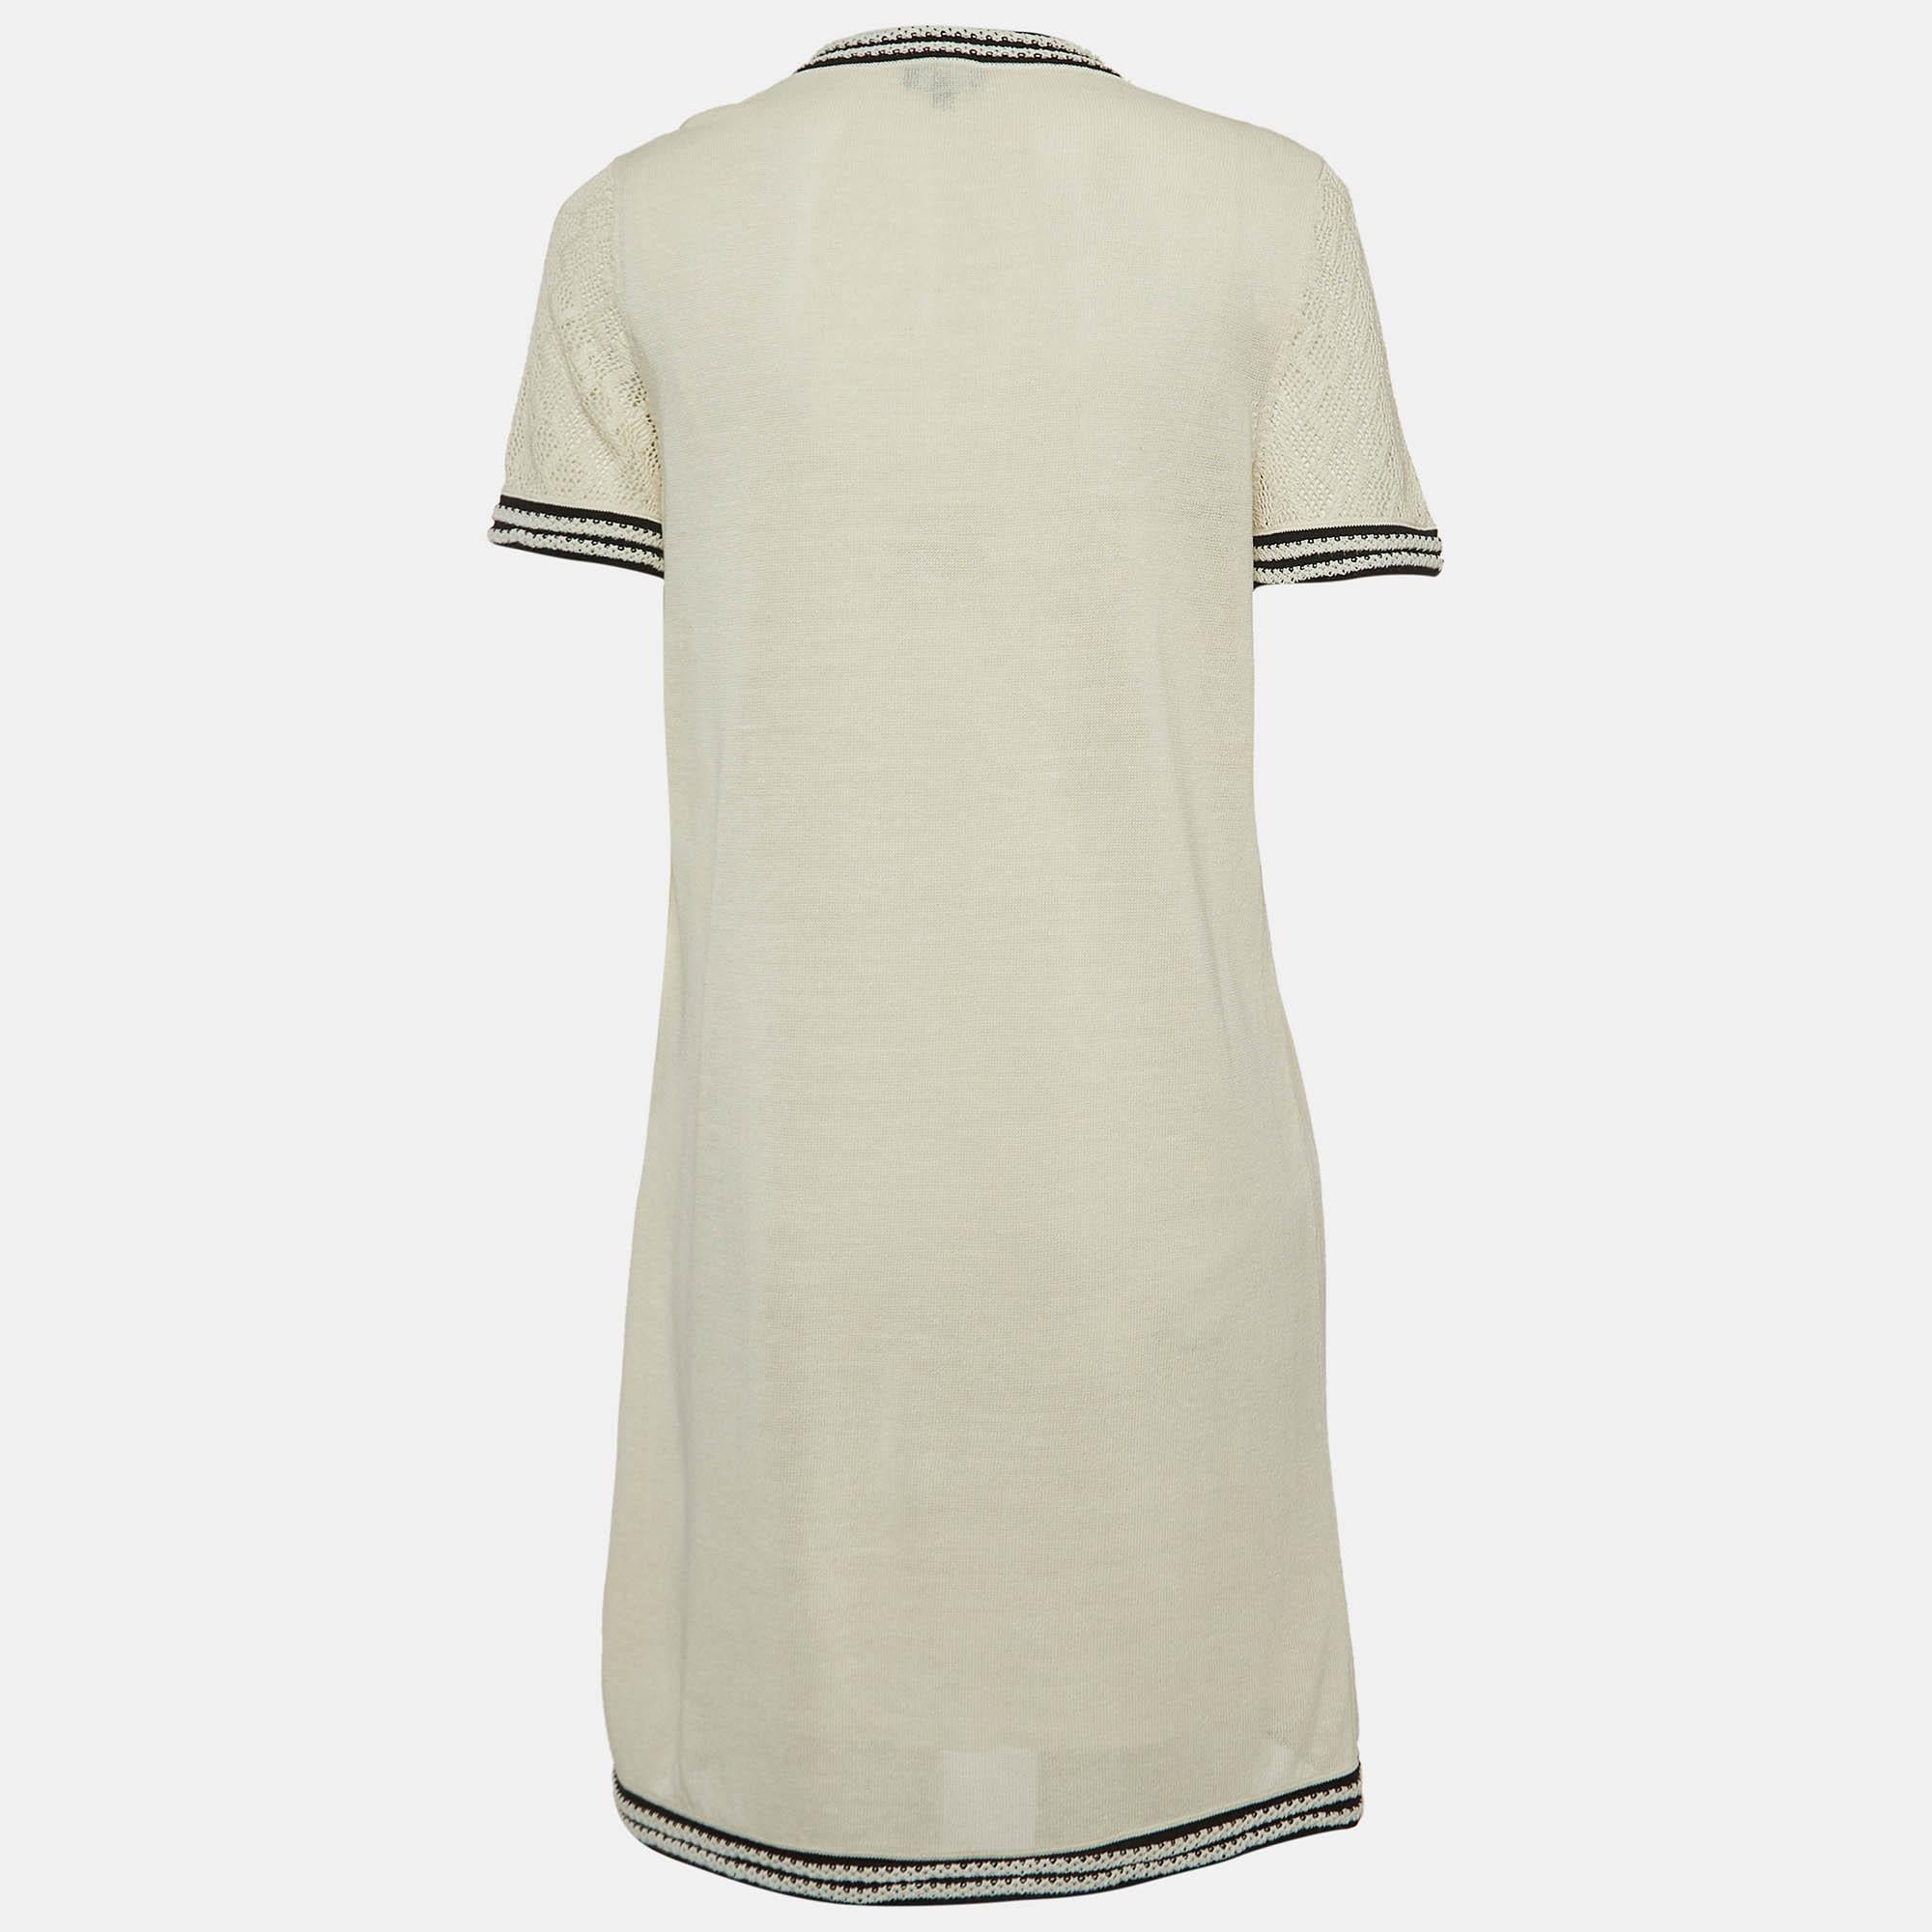 The Chanel dress is a chic blend of sophistication and playfulness. The dress features a monochromatic color scheme, a flattering mini length, and exquisite knit fabric. The addition of pockets adds a practical yet stylish touch, making it a